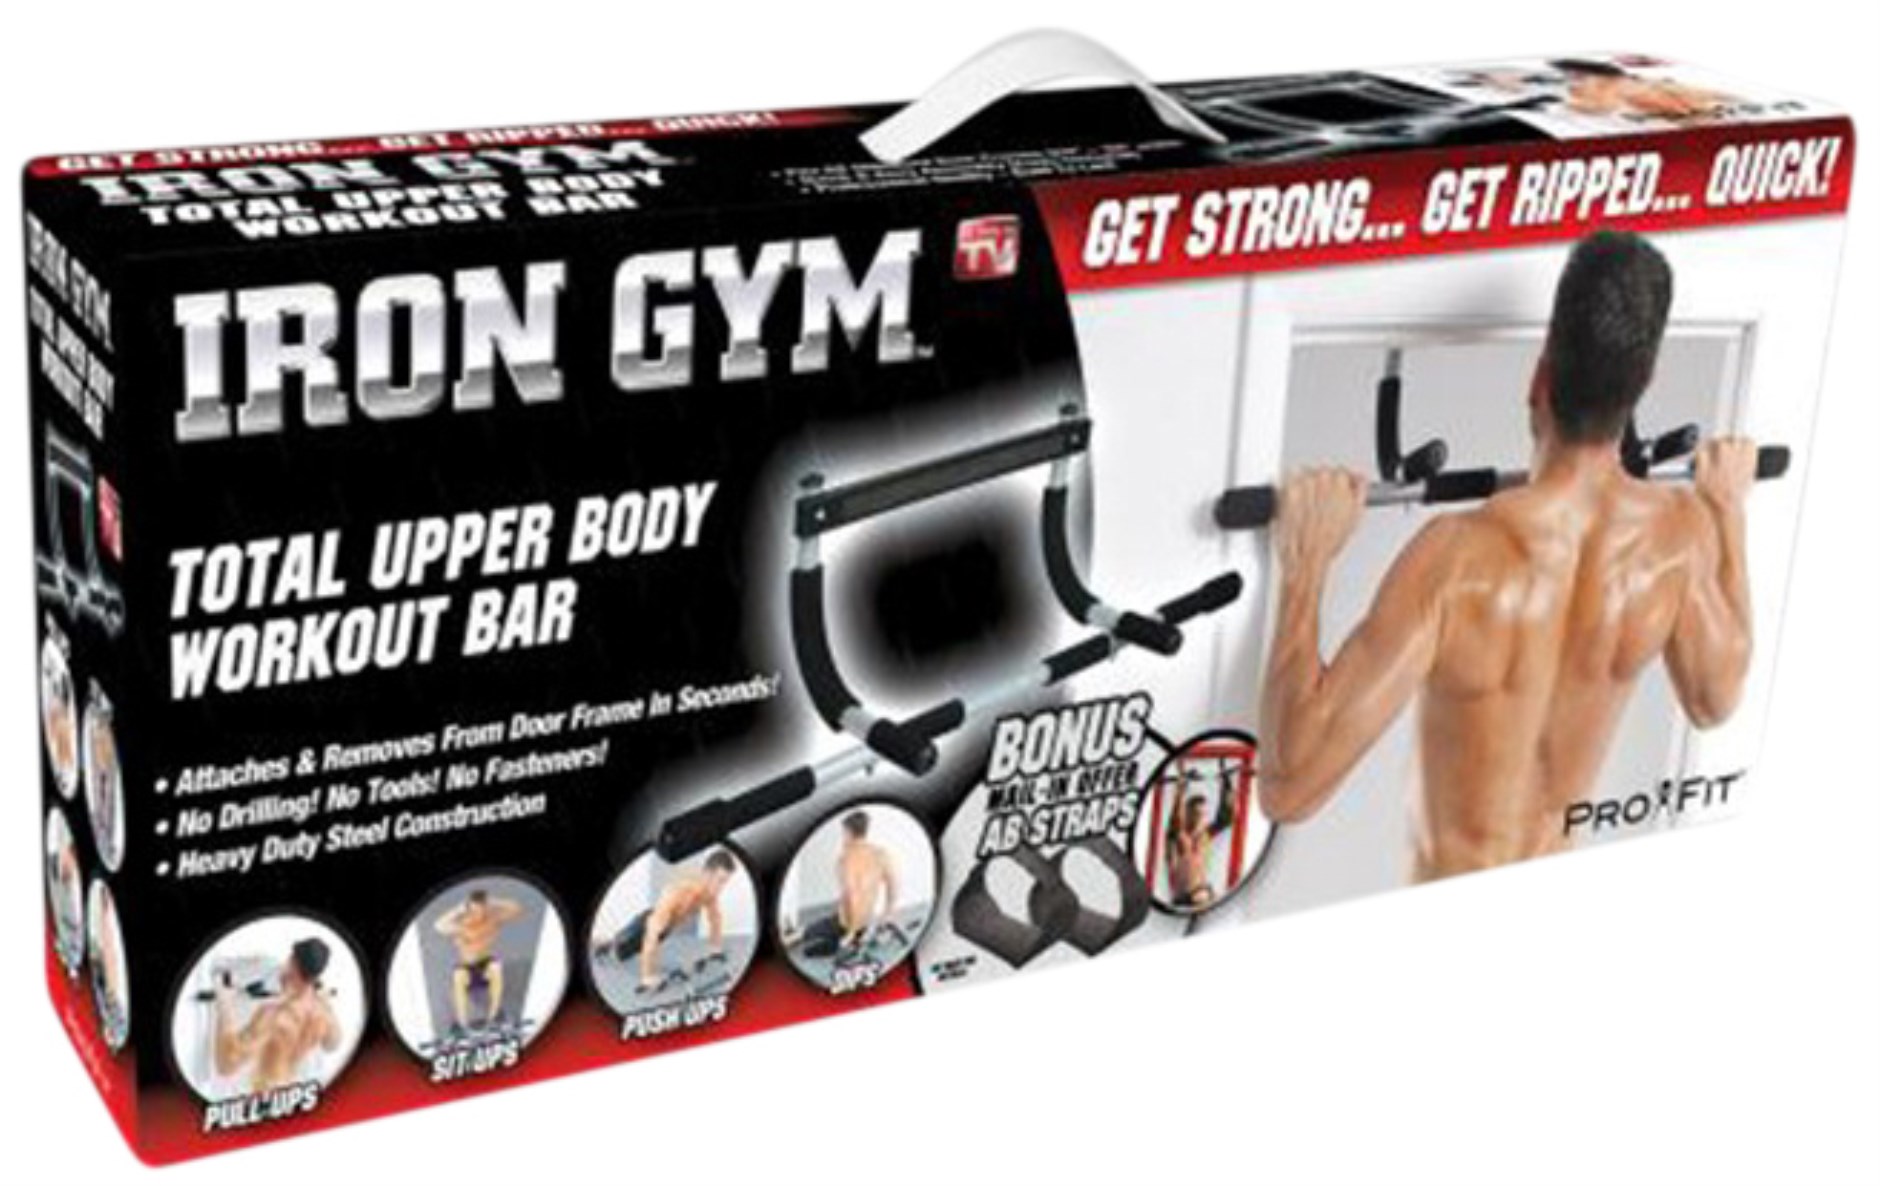 6 Day Iron gym total upper body workout for Burn Fat fast